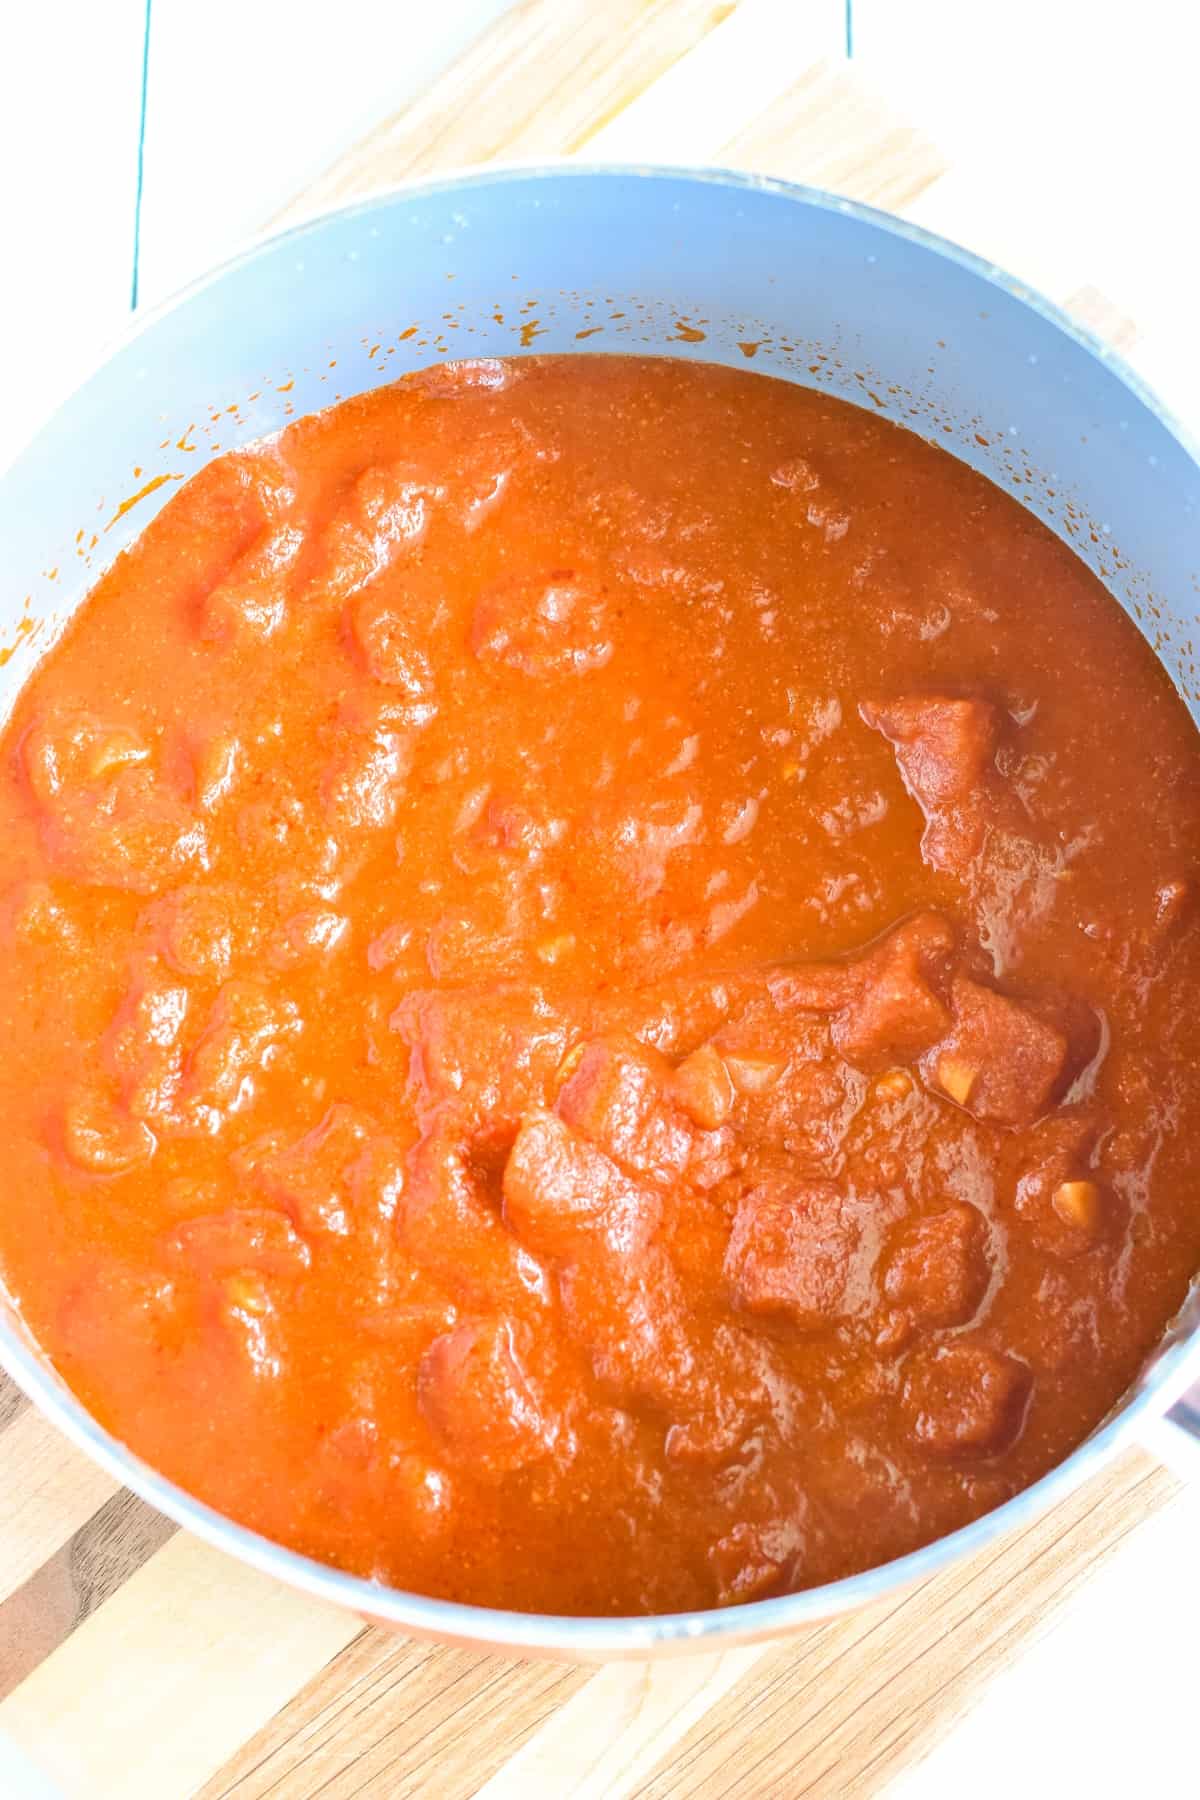 Cooked tomatoes and ingredients in a pan.